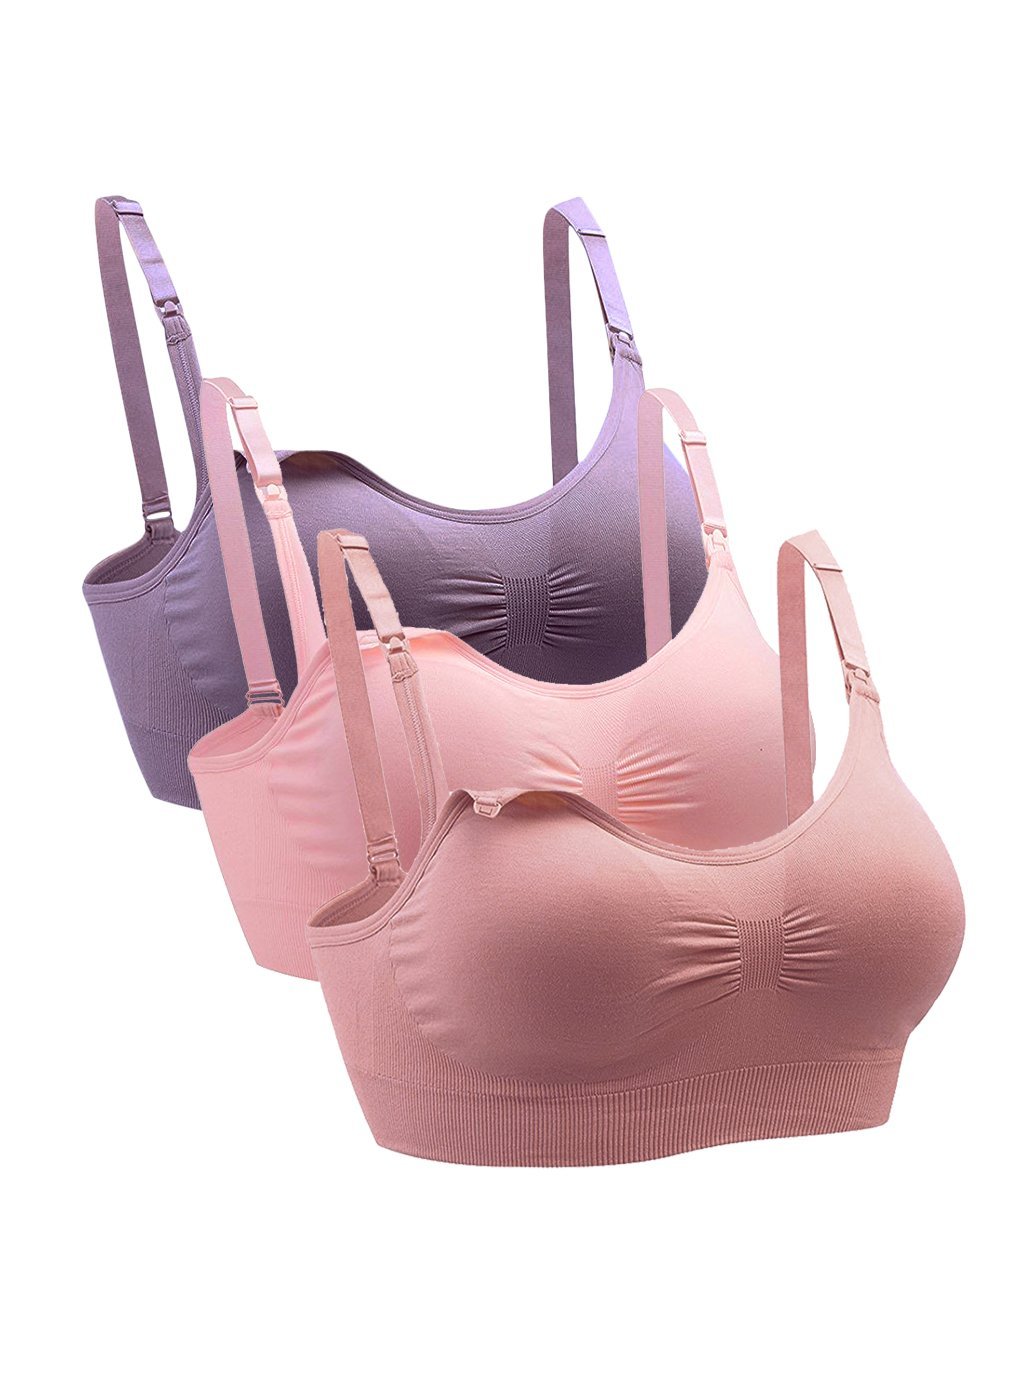 【Happier】 BABYBANG Breathable Soft No Rims Front Closure B/C Cup Pregnant  Women Lingerie Maternity Nursing Bras Large Size Brassiere Breastfeeding